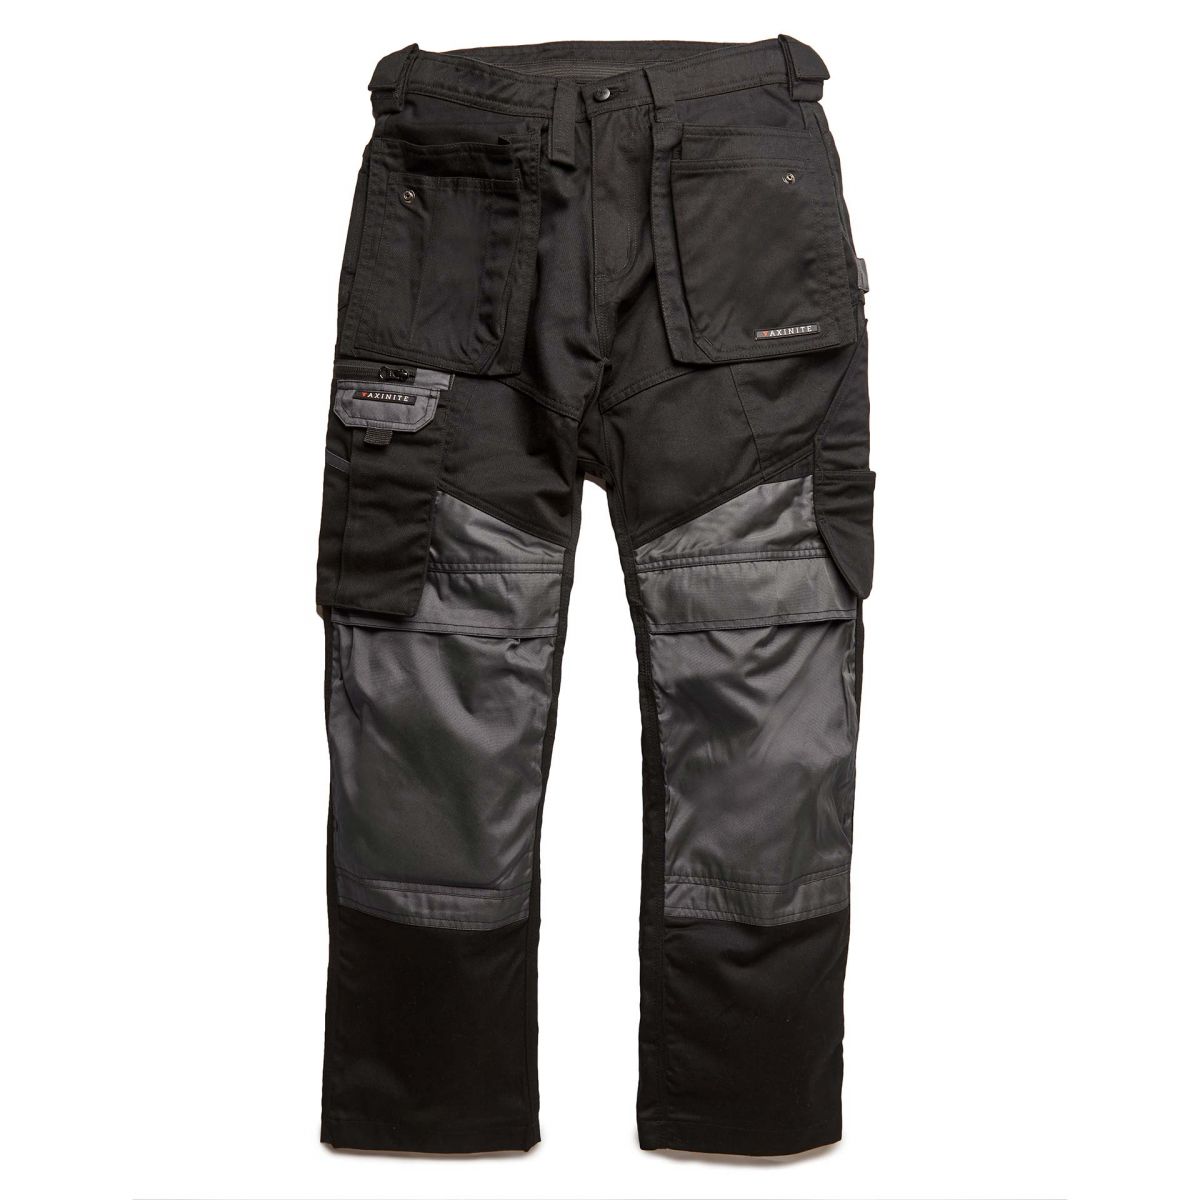 View Axinite AX39 Workwear Trousers Black 46L information